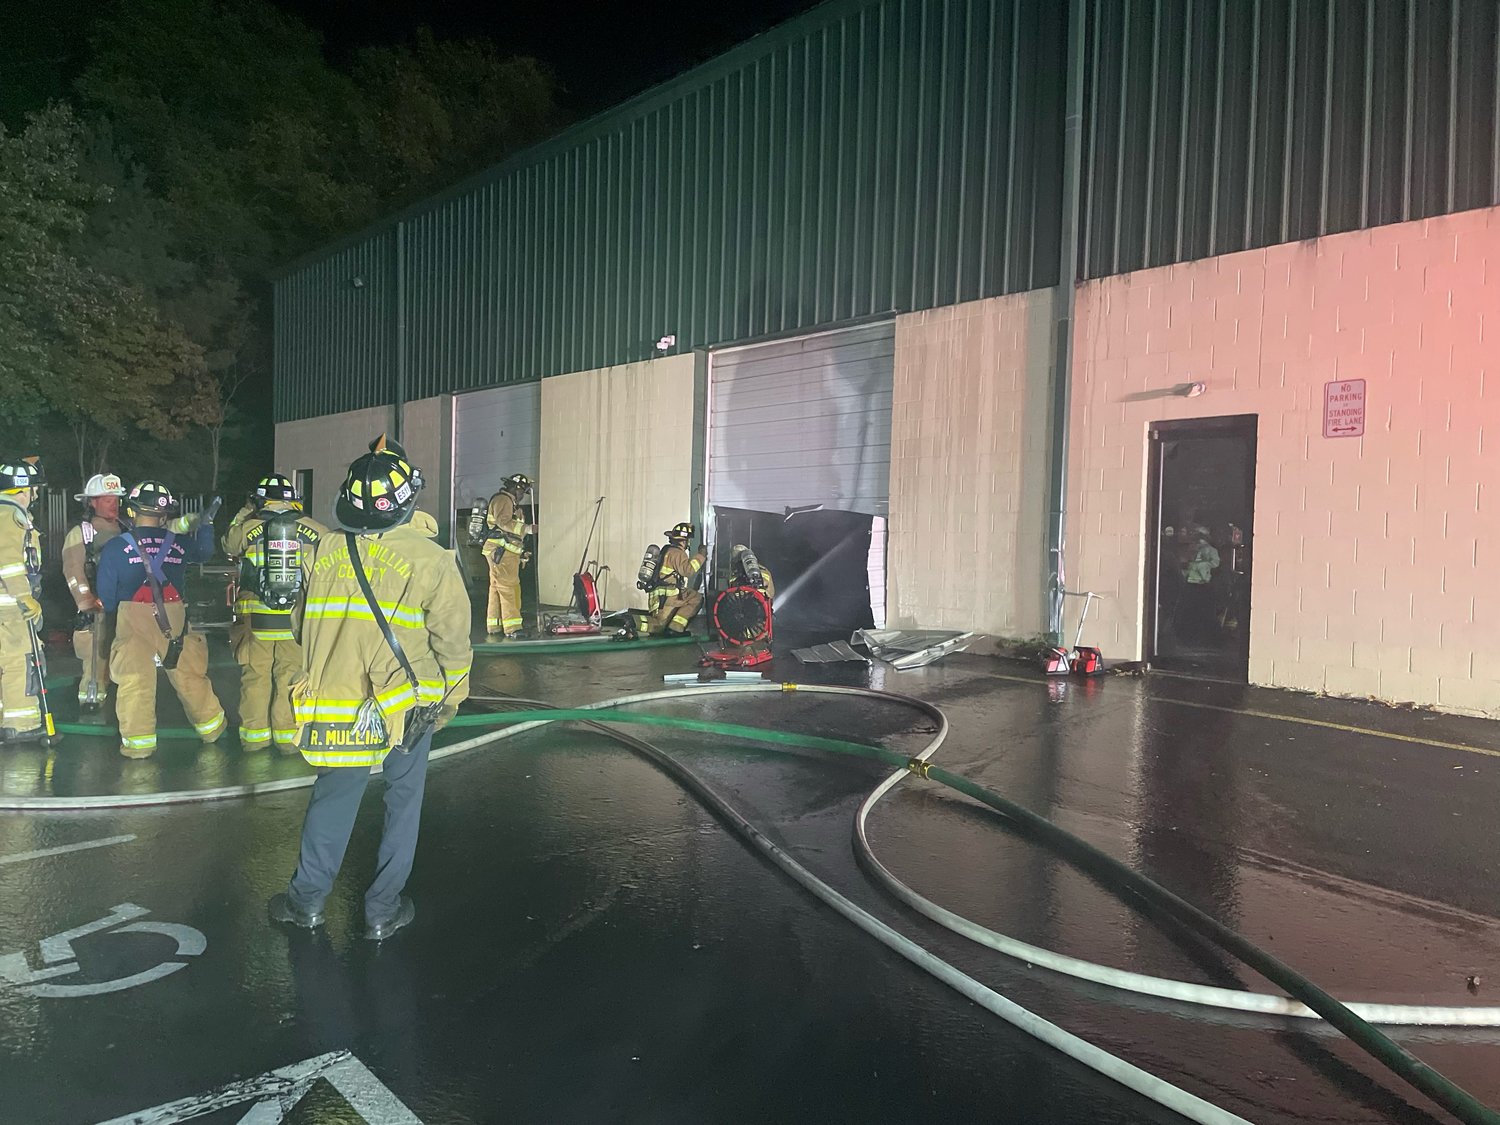 Prince William Fire & Rescue Responds to Warehouse Fire in Gainesville: Fire triggered early notification & sprinkler system